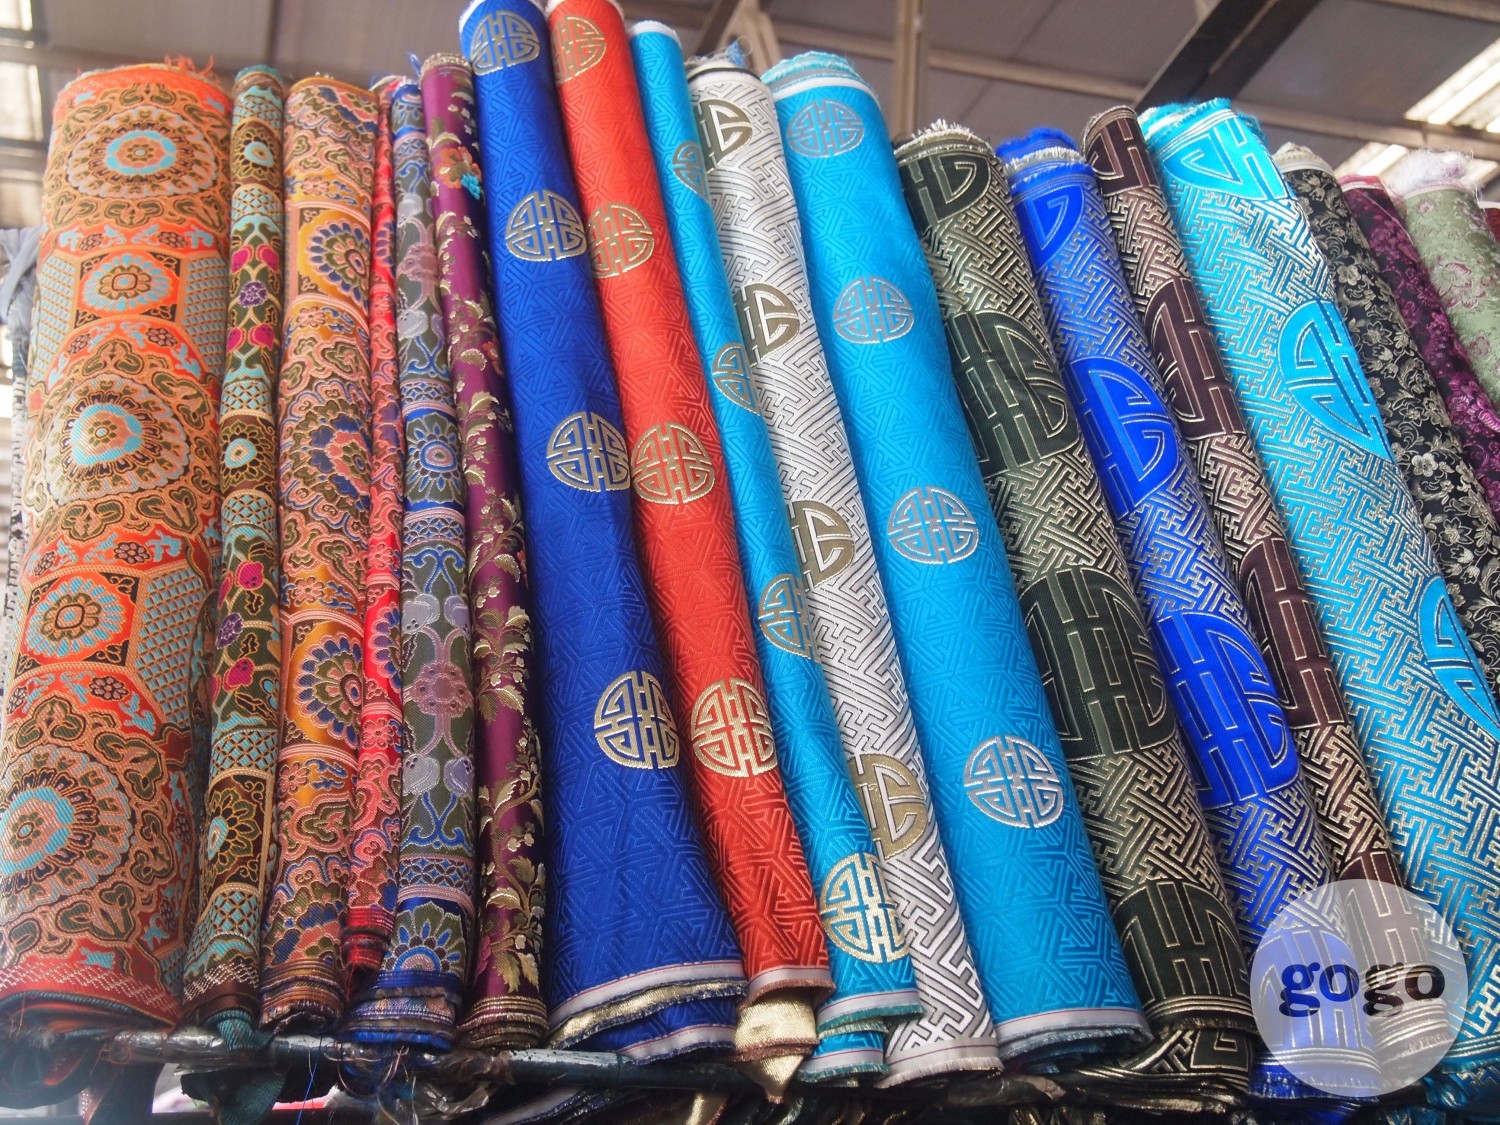 Magnag silk 8.000₮-10.000₮, Termen silk 18.000₮-25.000₮. Buyers are more interested at Magnag silk according to the salesperson.